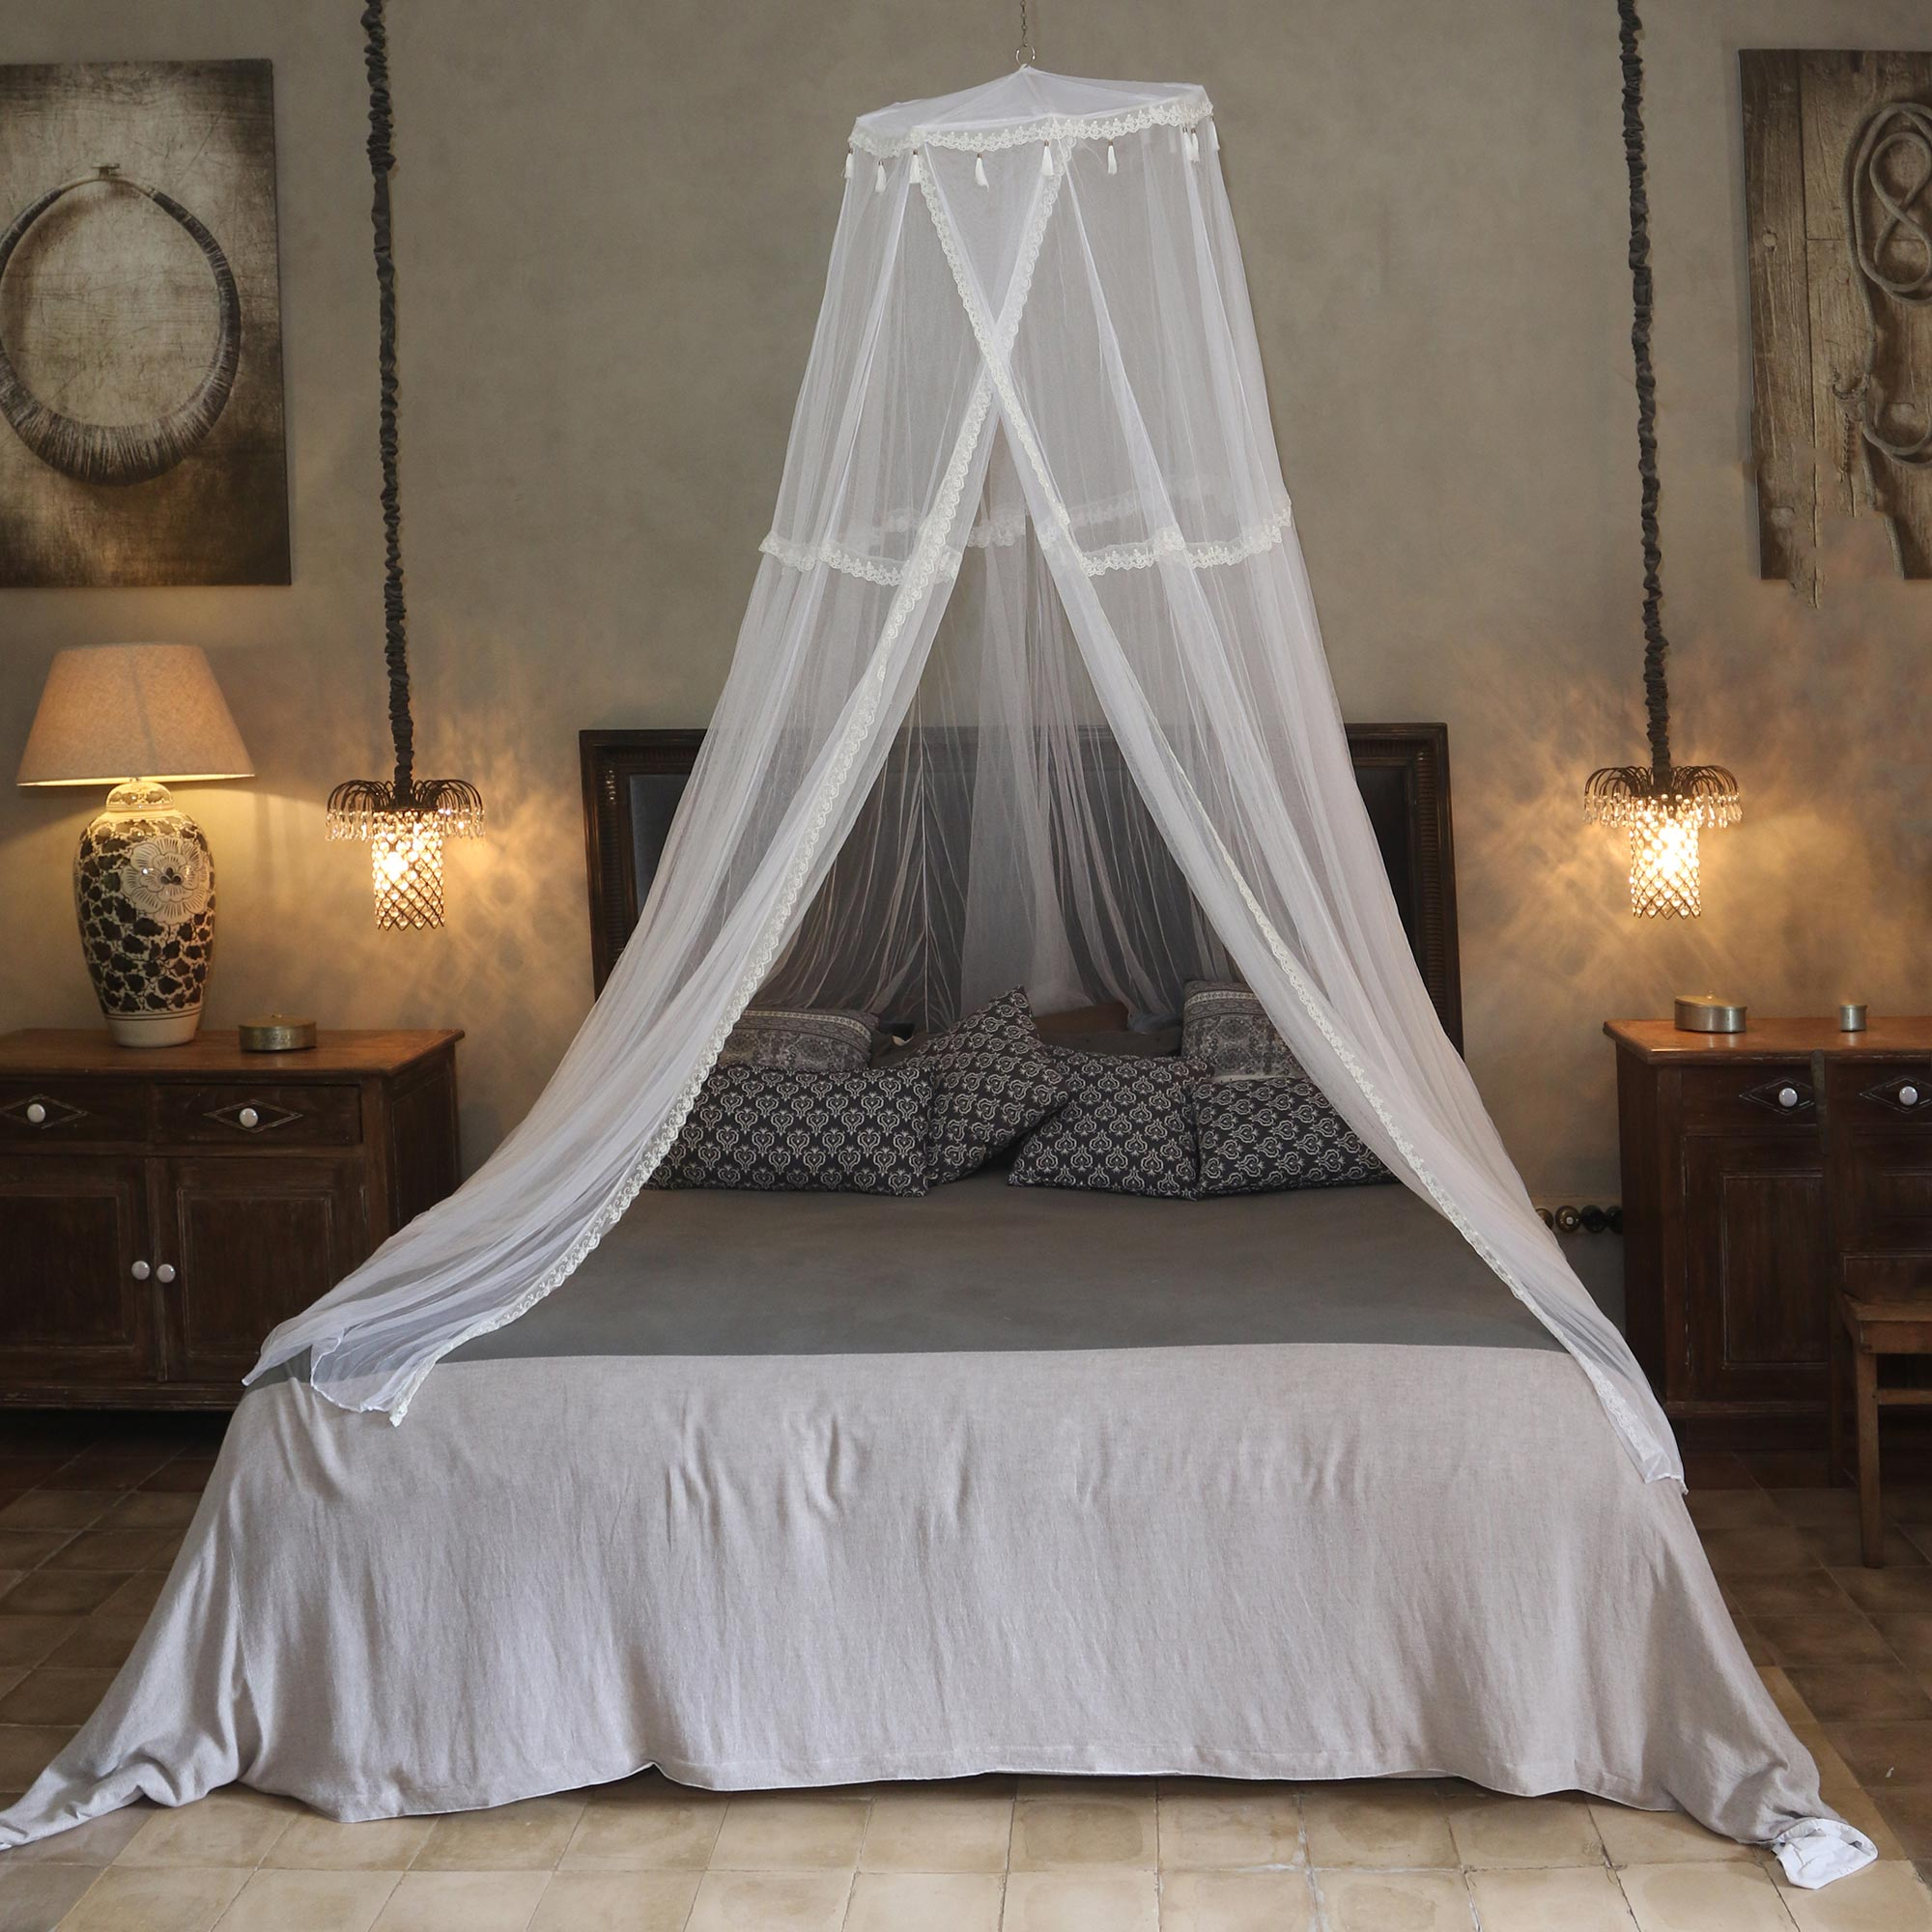 Queen Sized Cotton Bed Canopy Netting - Sleep Well